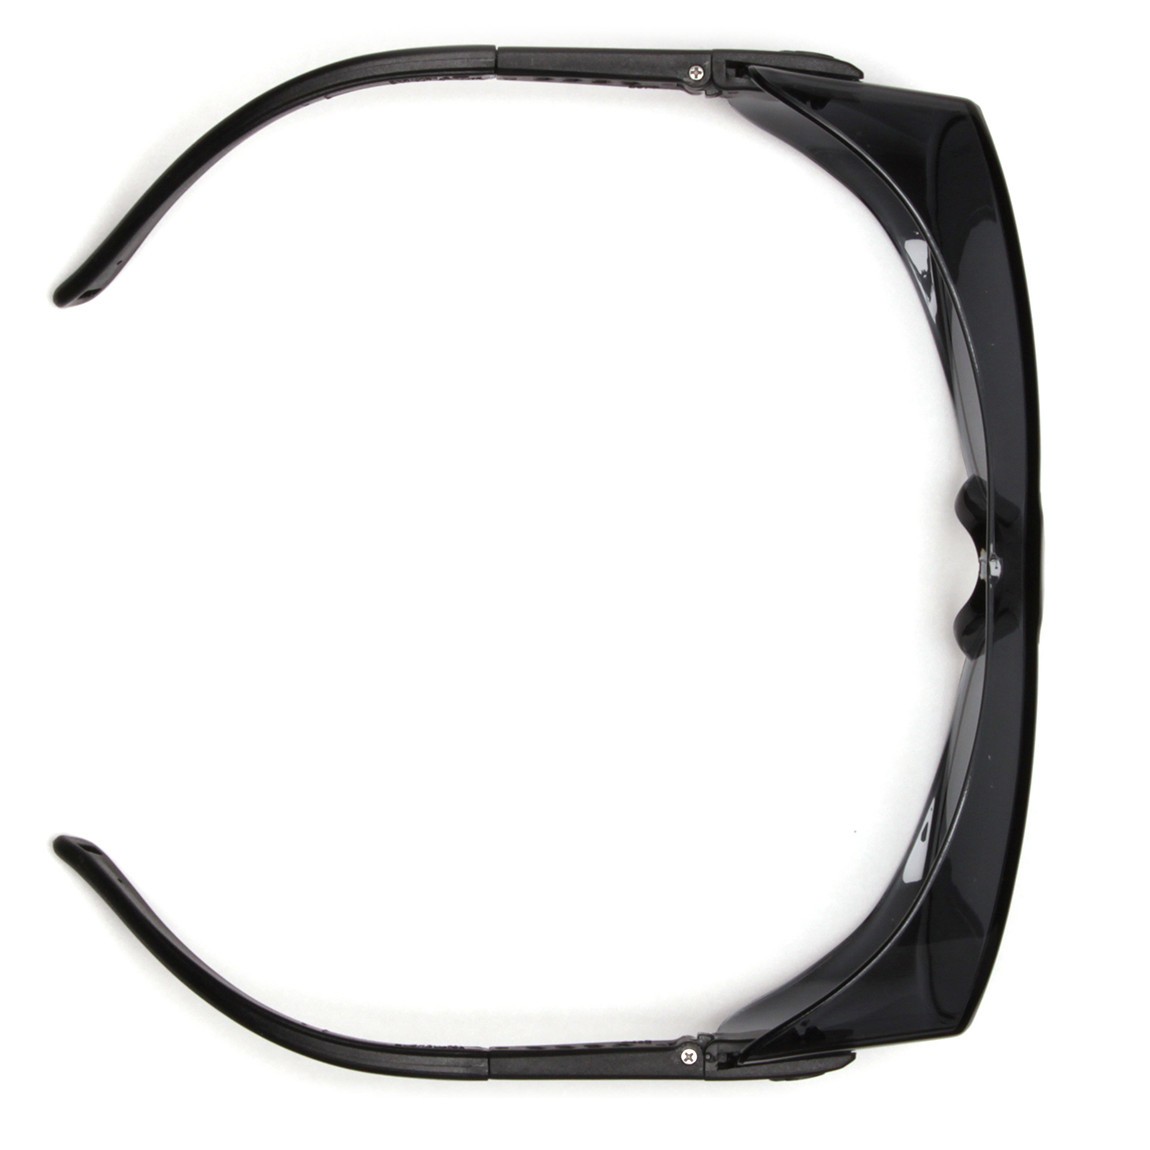 Pyramex S3560sfj Ots Safety Glasses Black Temples 3 0 Ir Filter Lens Full Source